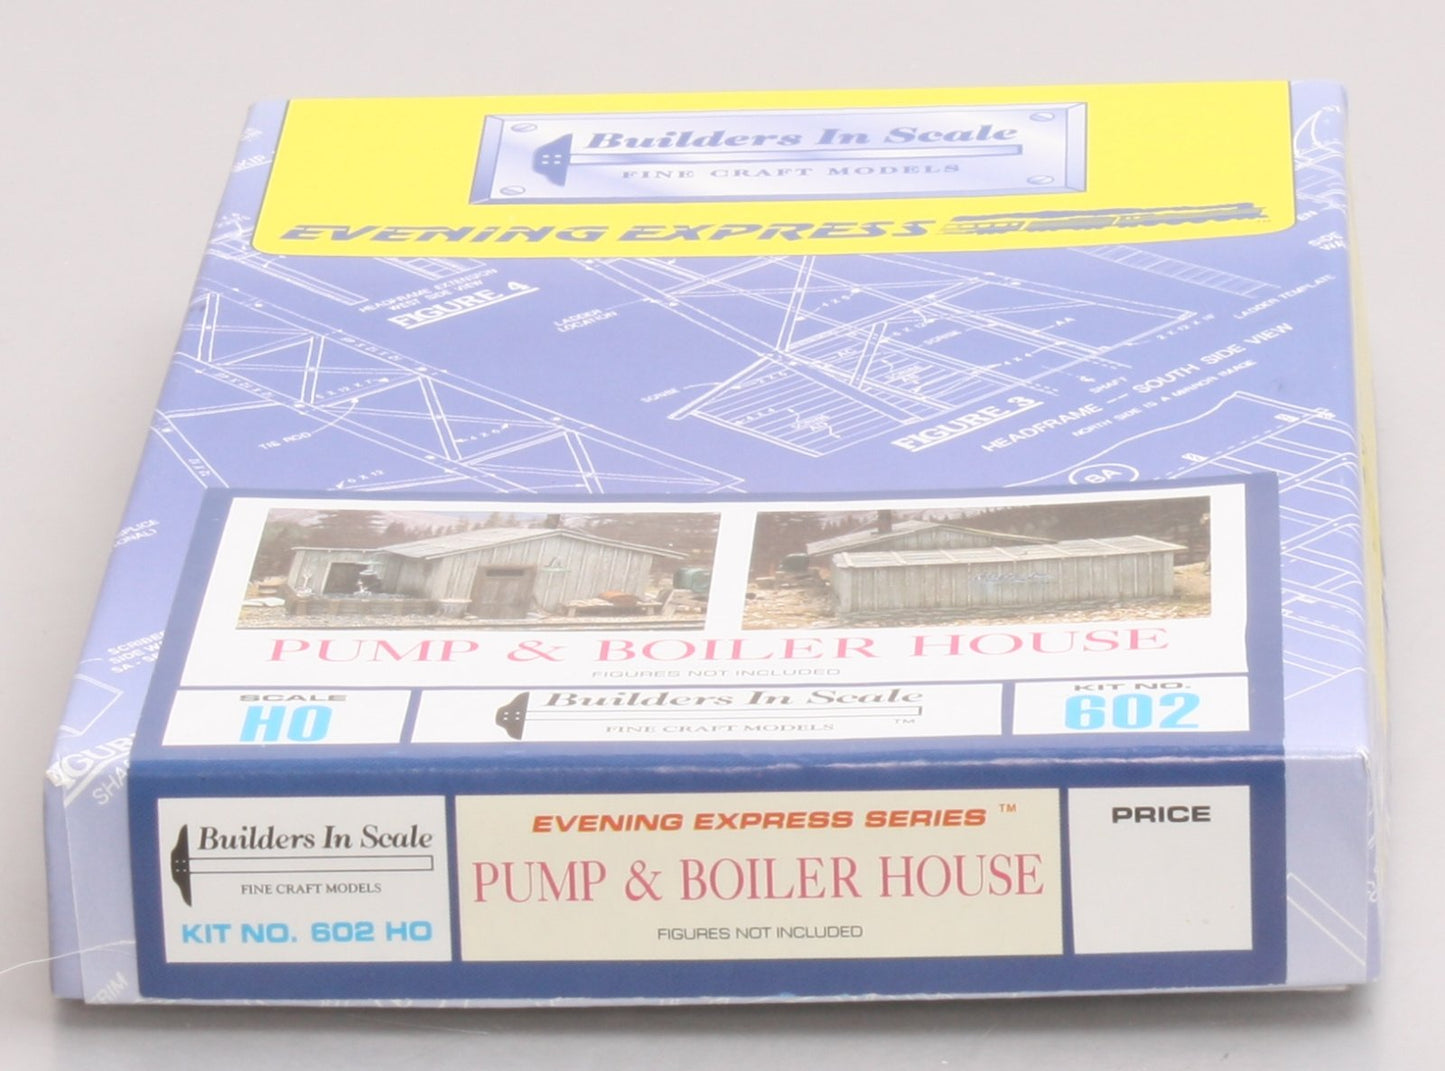 Builders-in-Scale 602 HO Scale Pump & Boiler Evening Express Series Kit